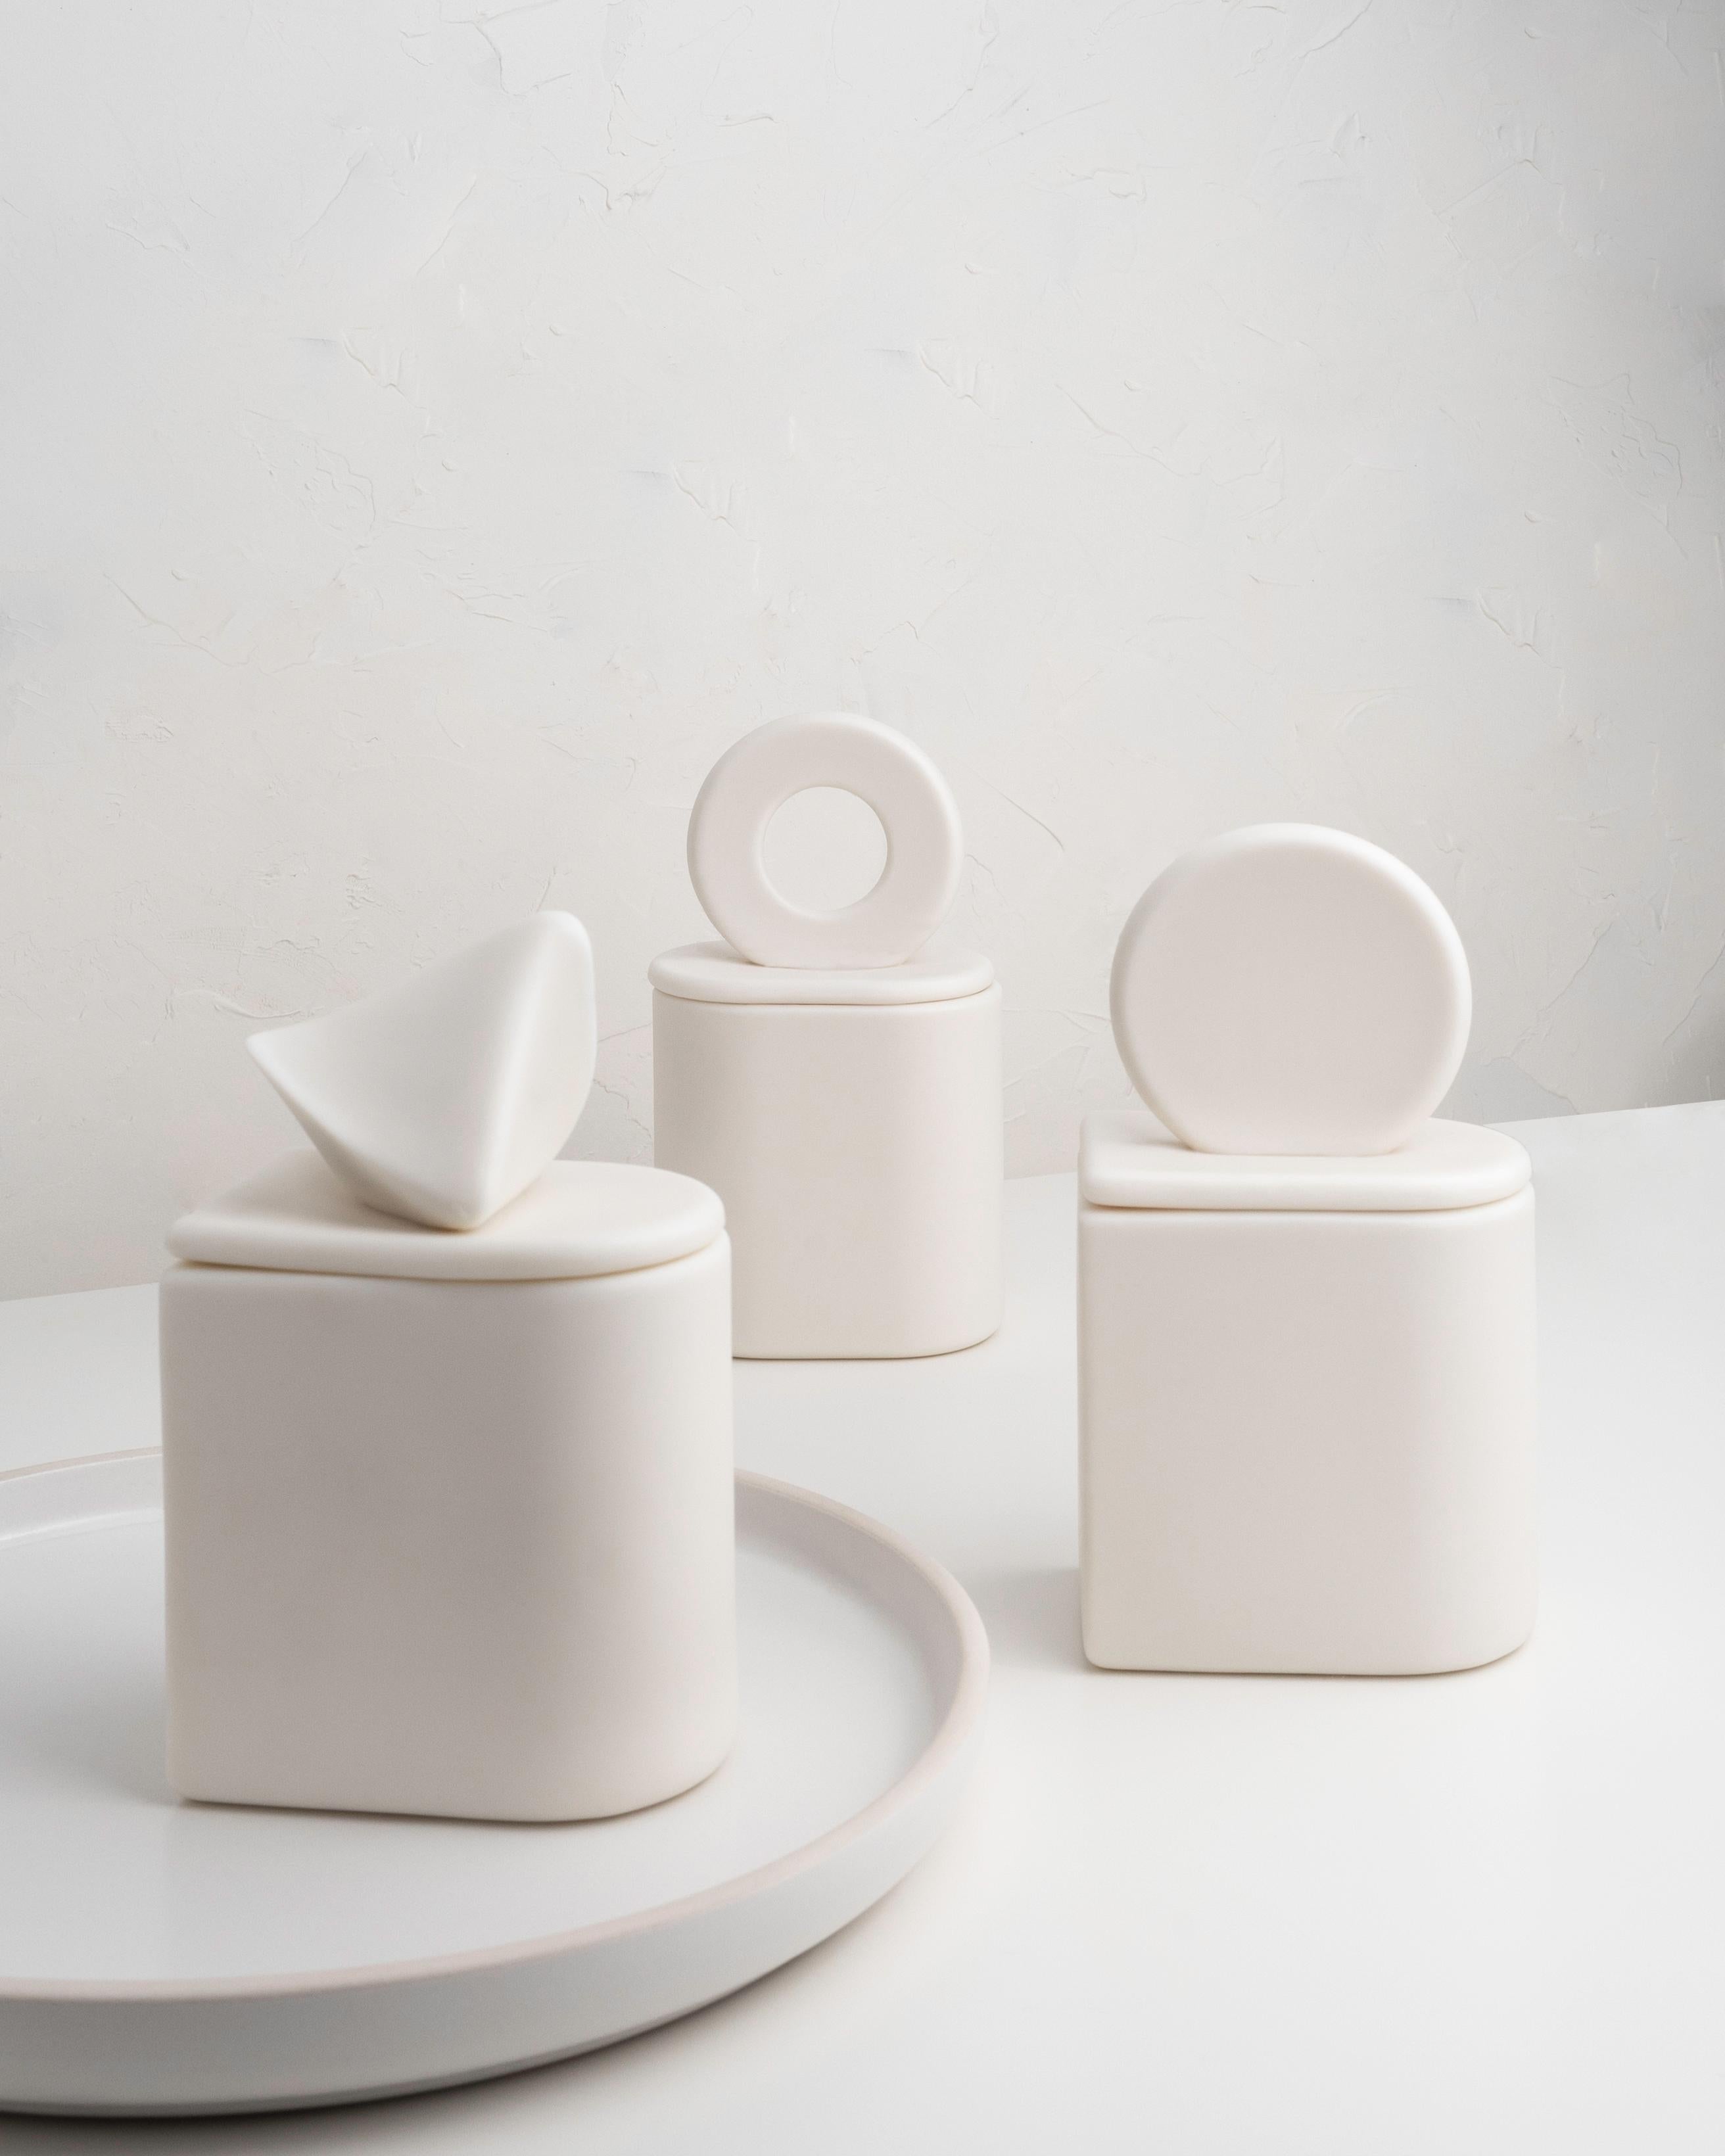 Uneven. A minimalist ceramic container, Parian porcelain. 

A collection inspired by nature and classical forms.

Parian porcelain vessels, unglazed.

• 160 g natural soy wax

• app 30 h burn time

• wooden wick

• fragrance oils